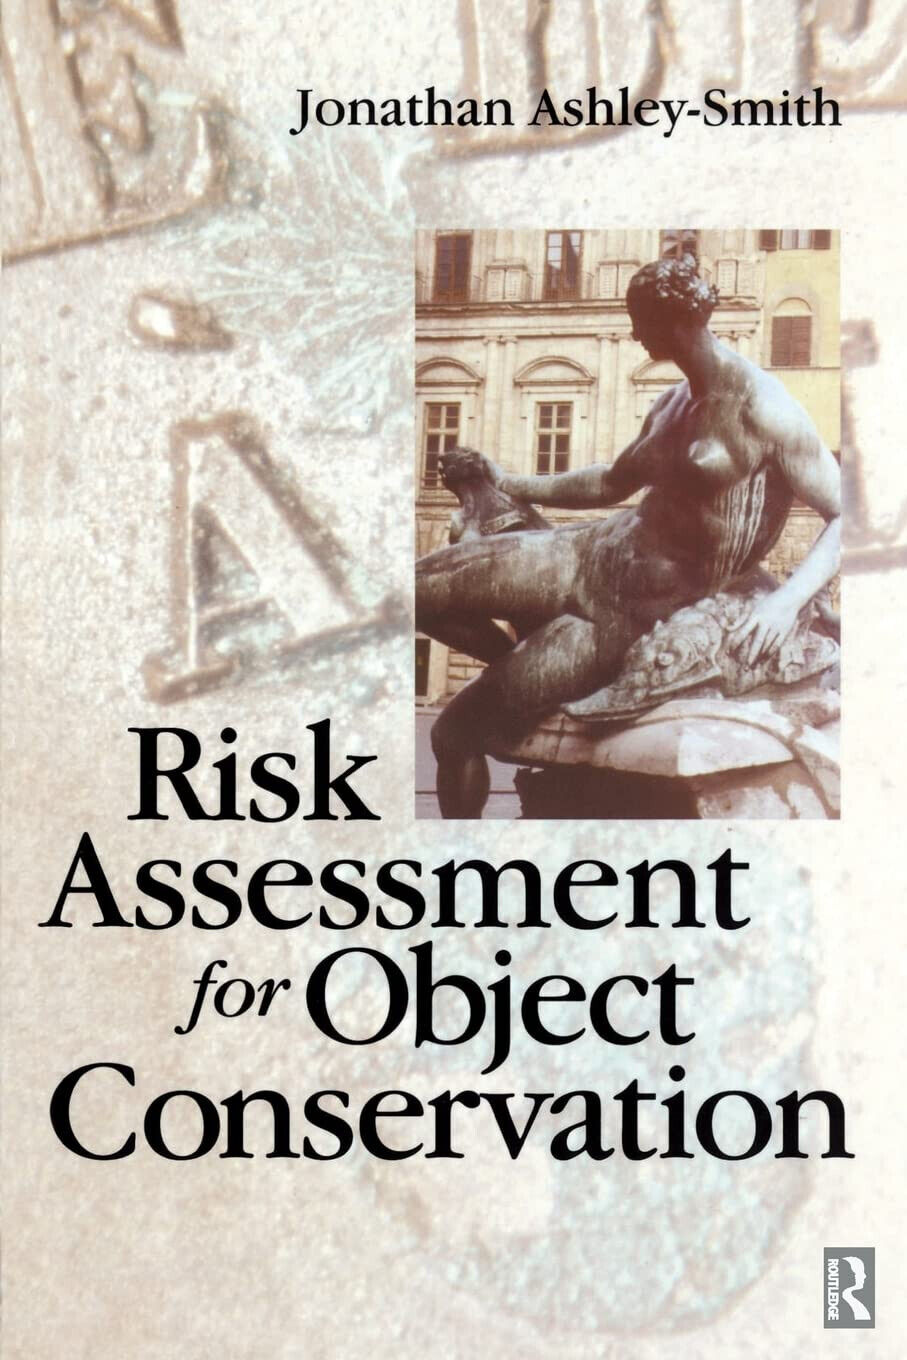 Risk Assessment for Object Conservation - Jonathan Ashley-Smith - 1999